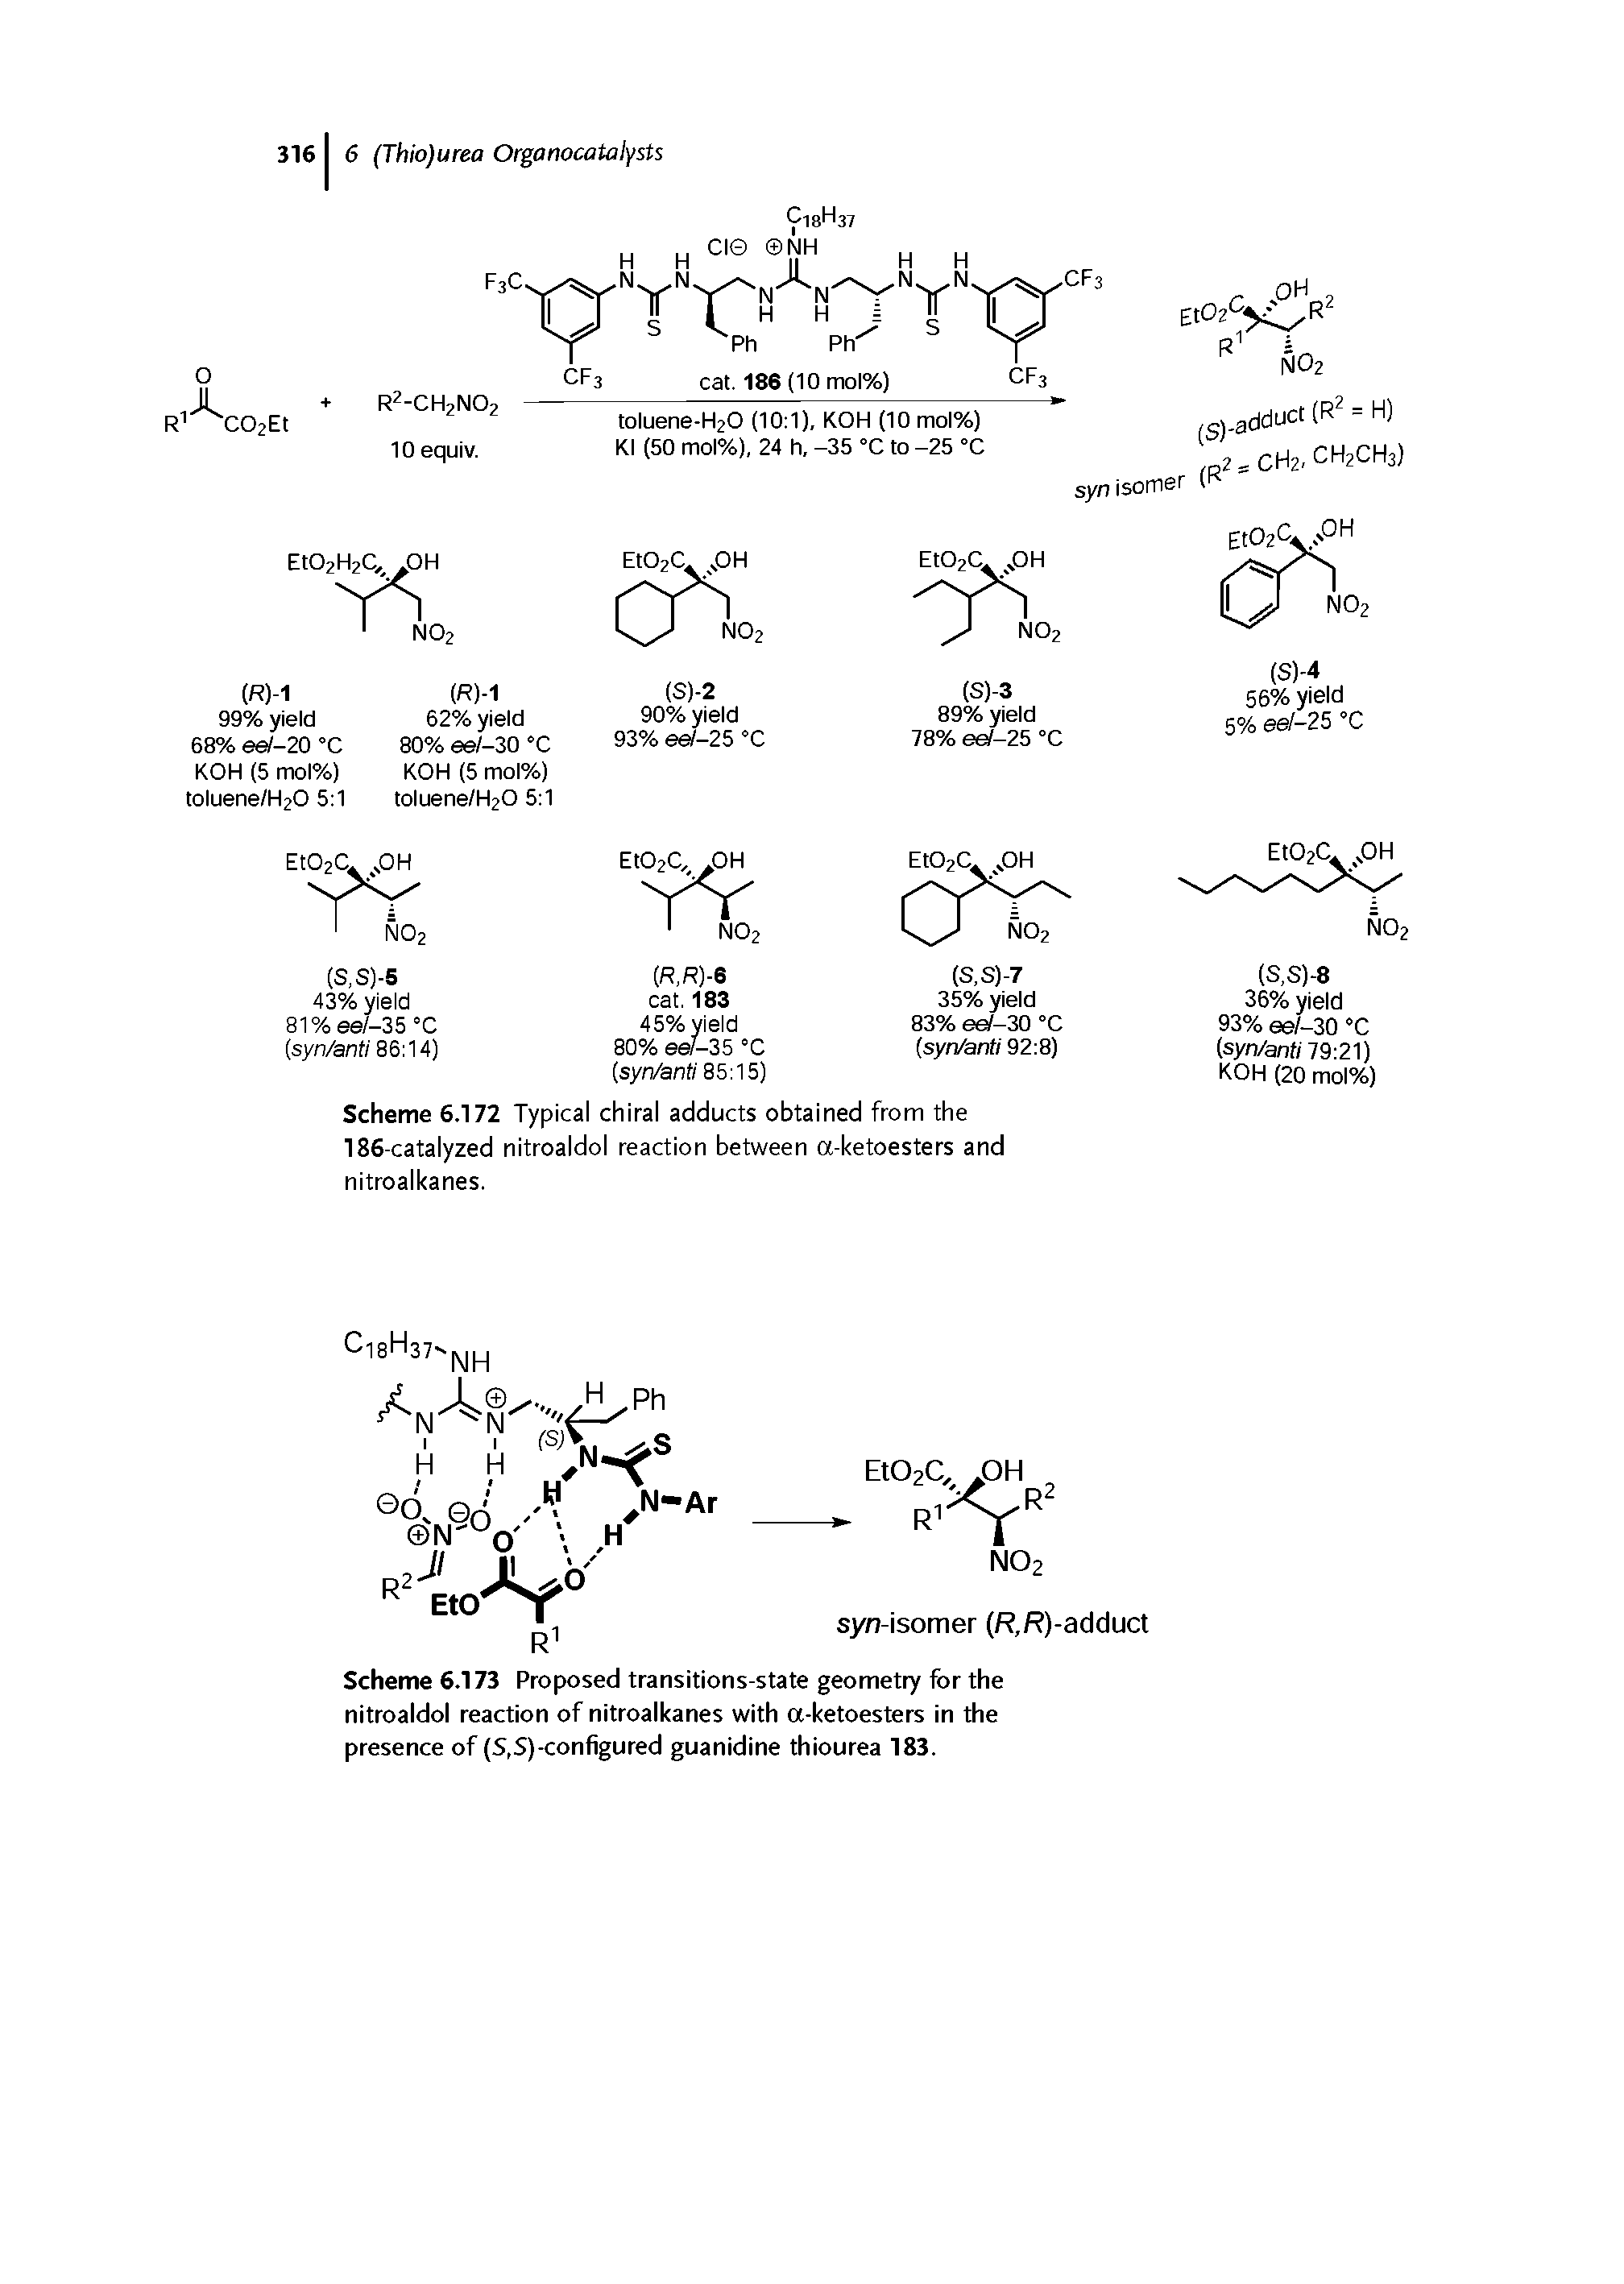 Scheme 6.173 Proposed transitions-state geometry for the nitroaldol reaction of nitroalkanes with a-ketoesters in the presence of (S,S)-configured guanidine thiourea 183.